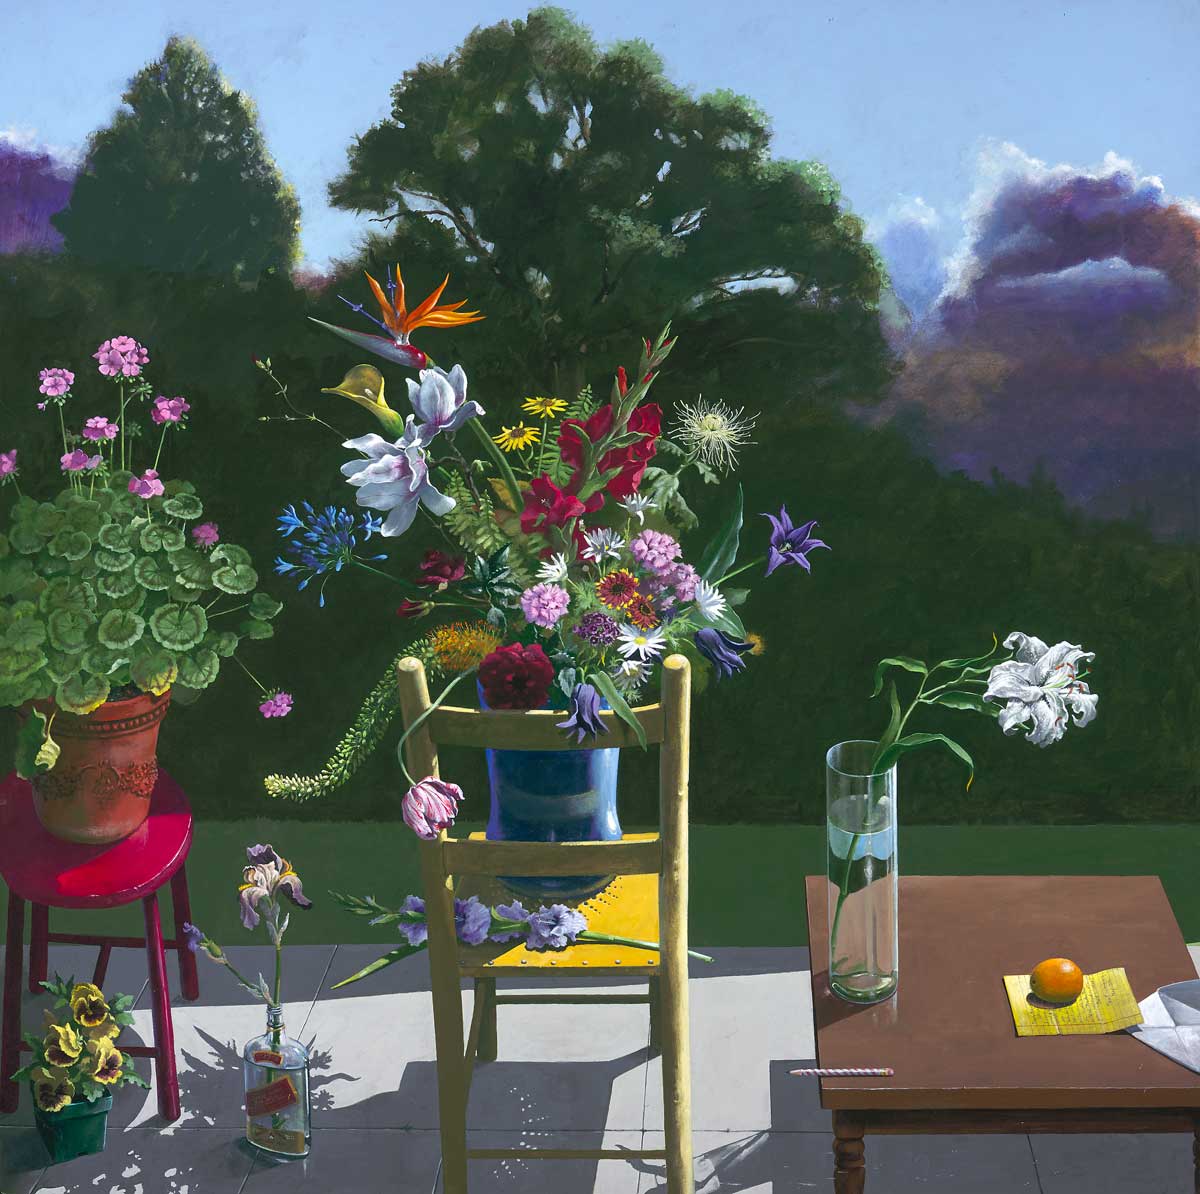 Paul Wonner (American, 1920–2008), Still Life with Flowers and a Note to KMK, 1992. Acrylic on canvas, 72 x 72 in. Collection of Kevin and Sherry Kearney.